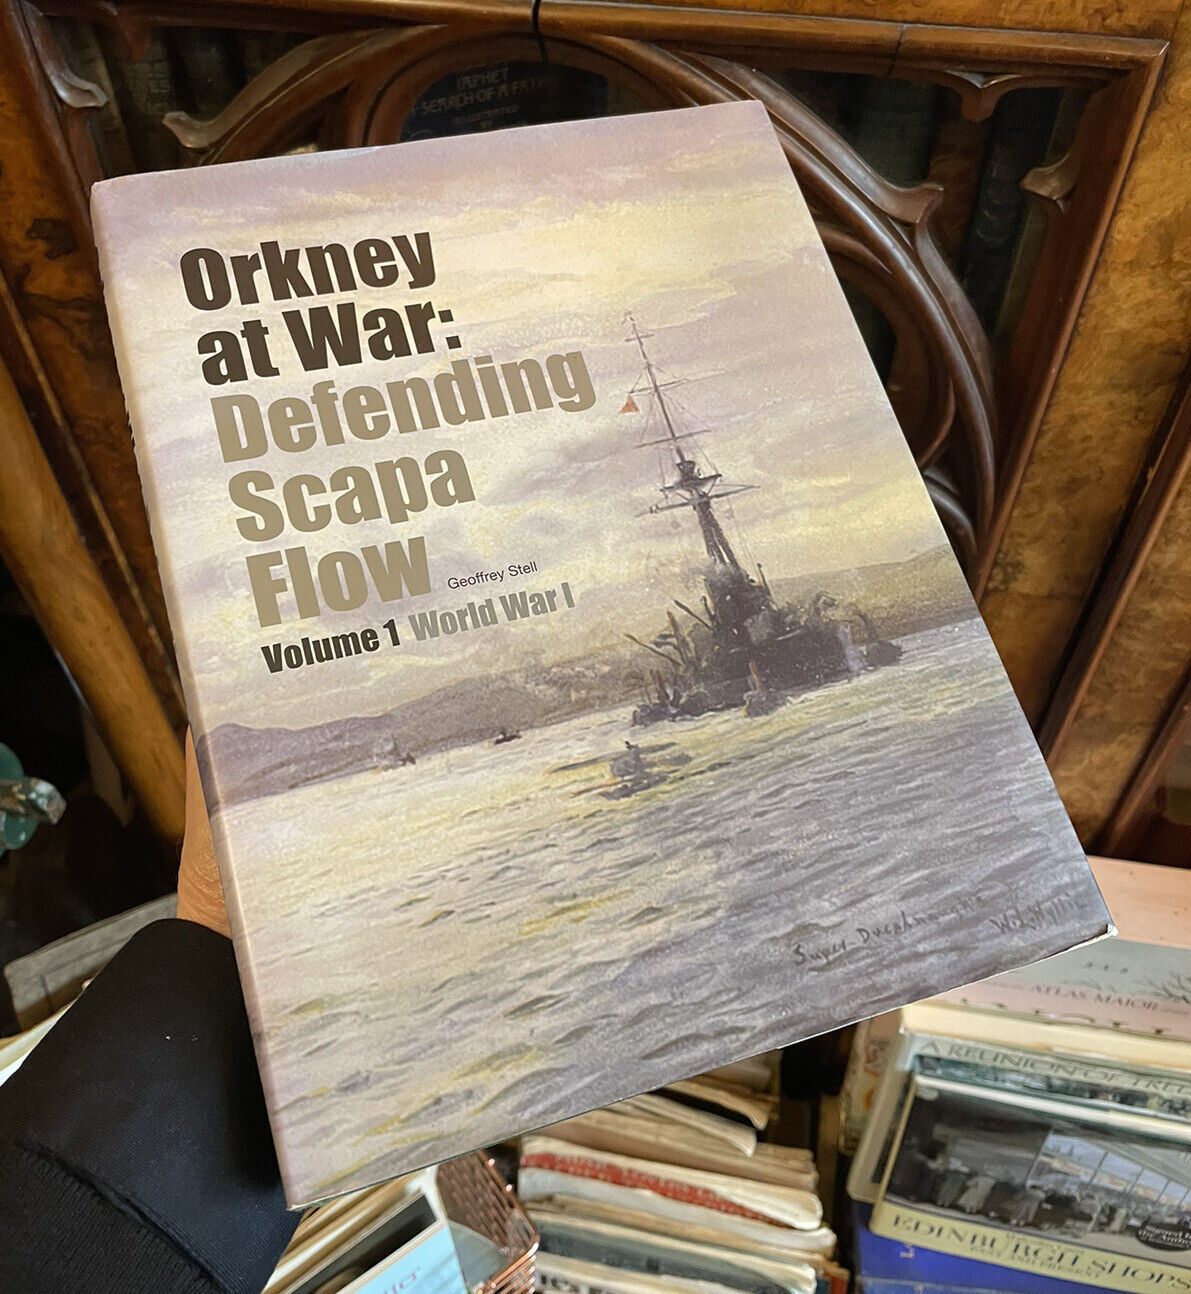 Orkney at War : Defending Scapa Flow WWI :Geoffrey Stell : Scotland Illustrated